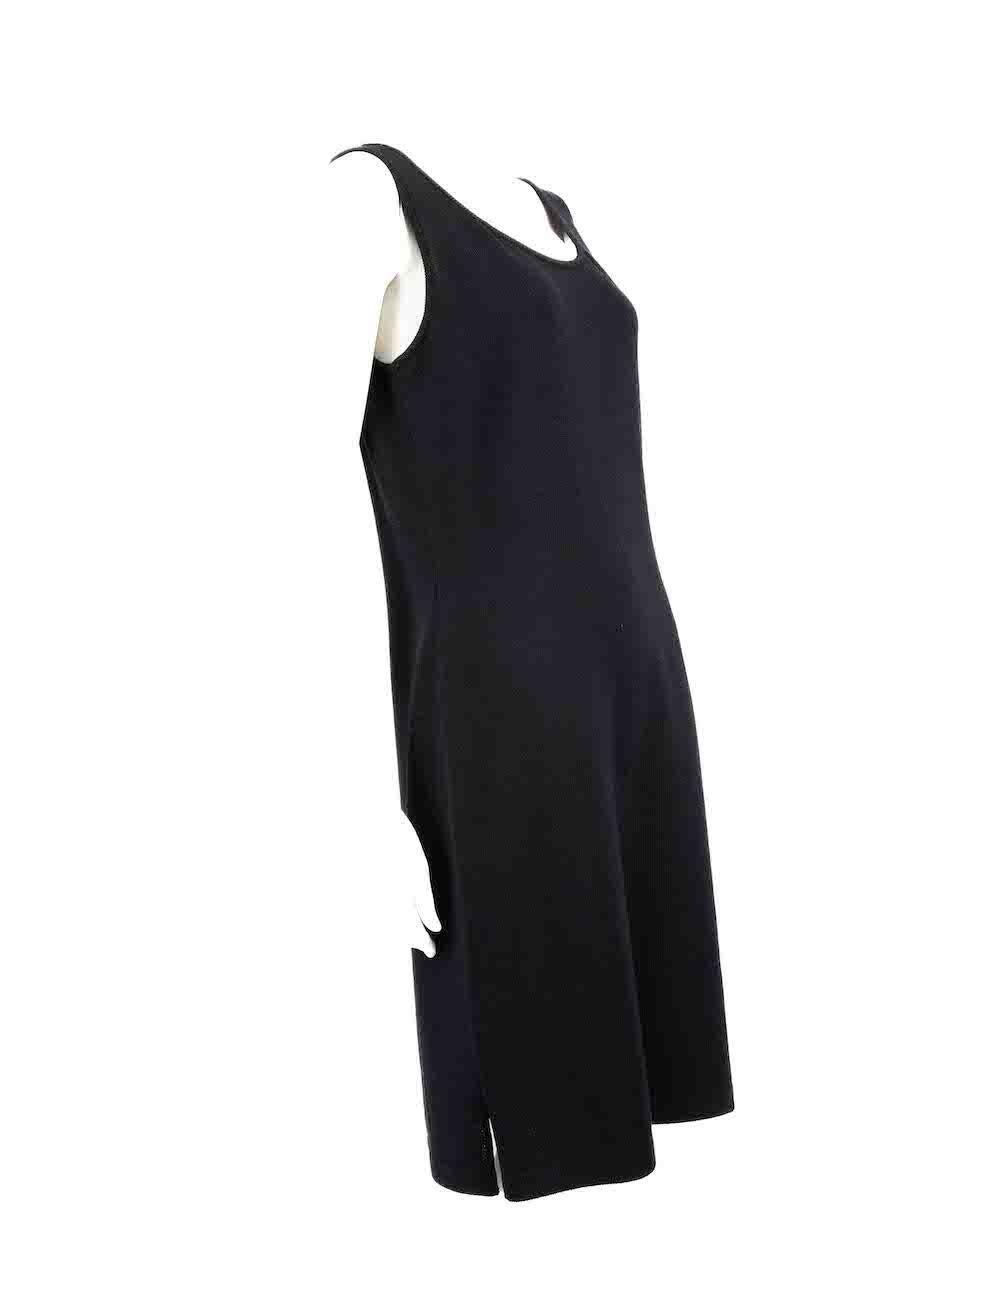 CONDITION is Never worn, with tags. No visible wear to dress is evident on this new St. John designer resale item.
 
 
 
 Details
 
 
 Navy
 
 Wool
 
 Knit dress
 
 Sleeveless
 
 Round neck
 
 Back zip and hook fastening
 
 Knee length
 
 
 
 
 
